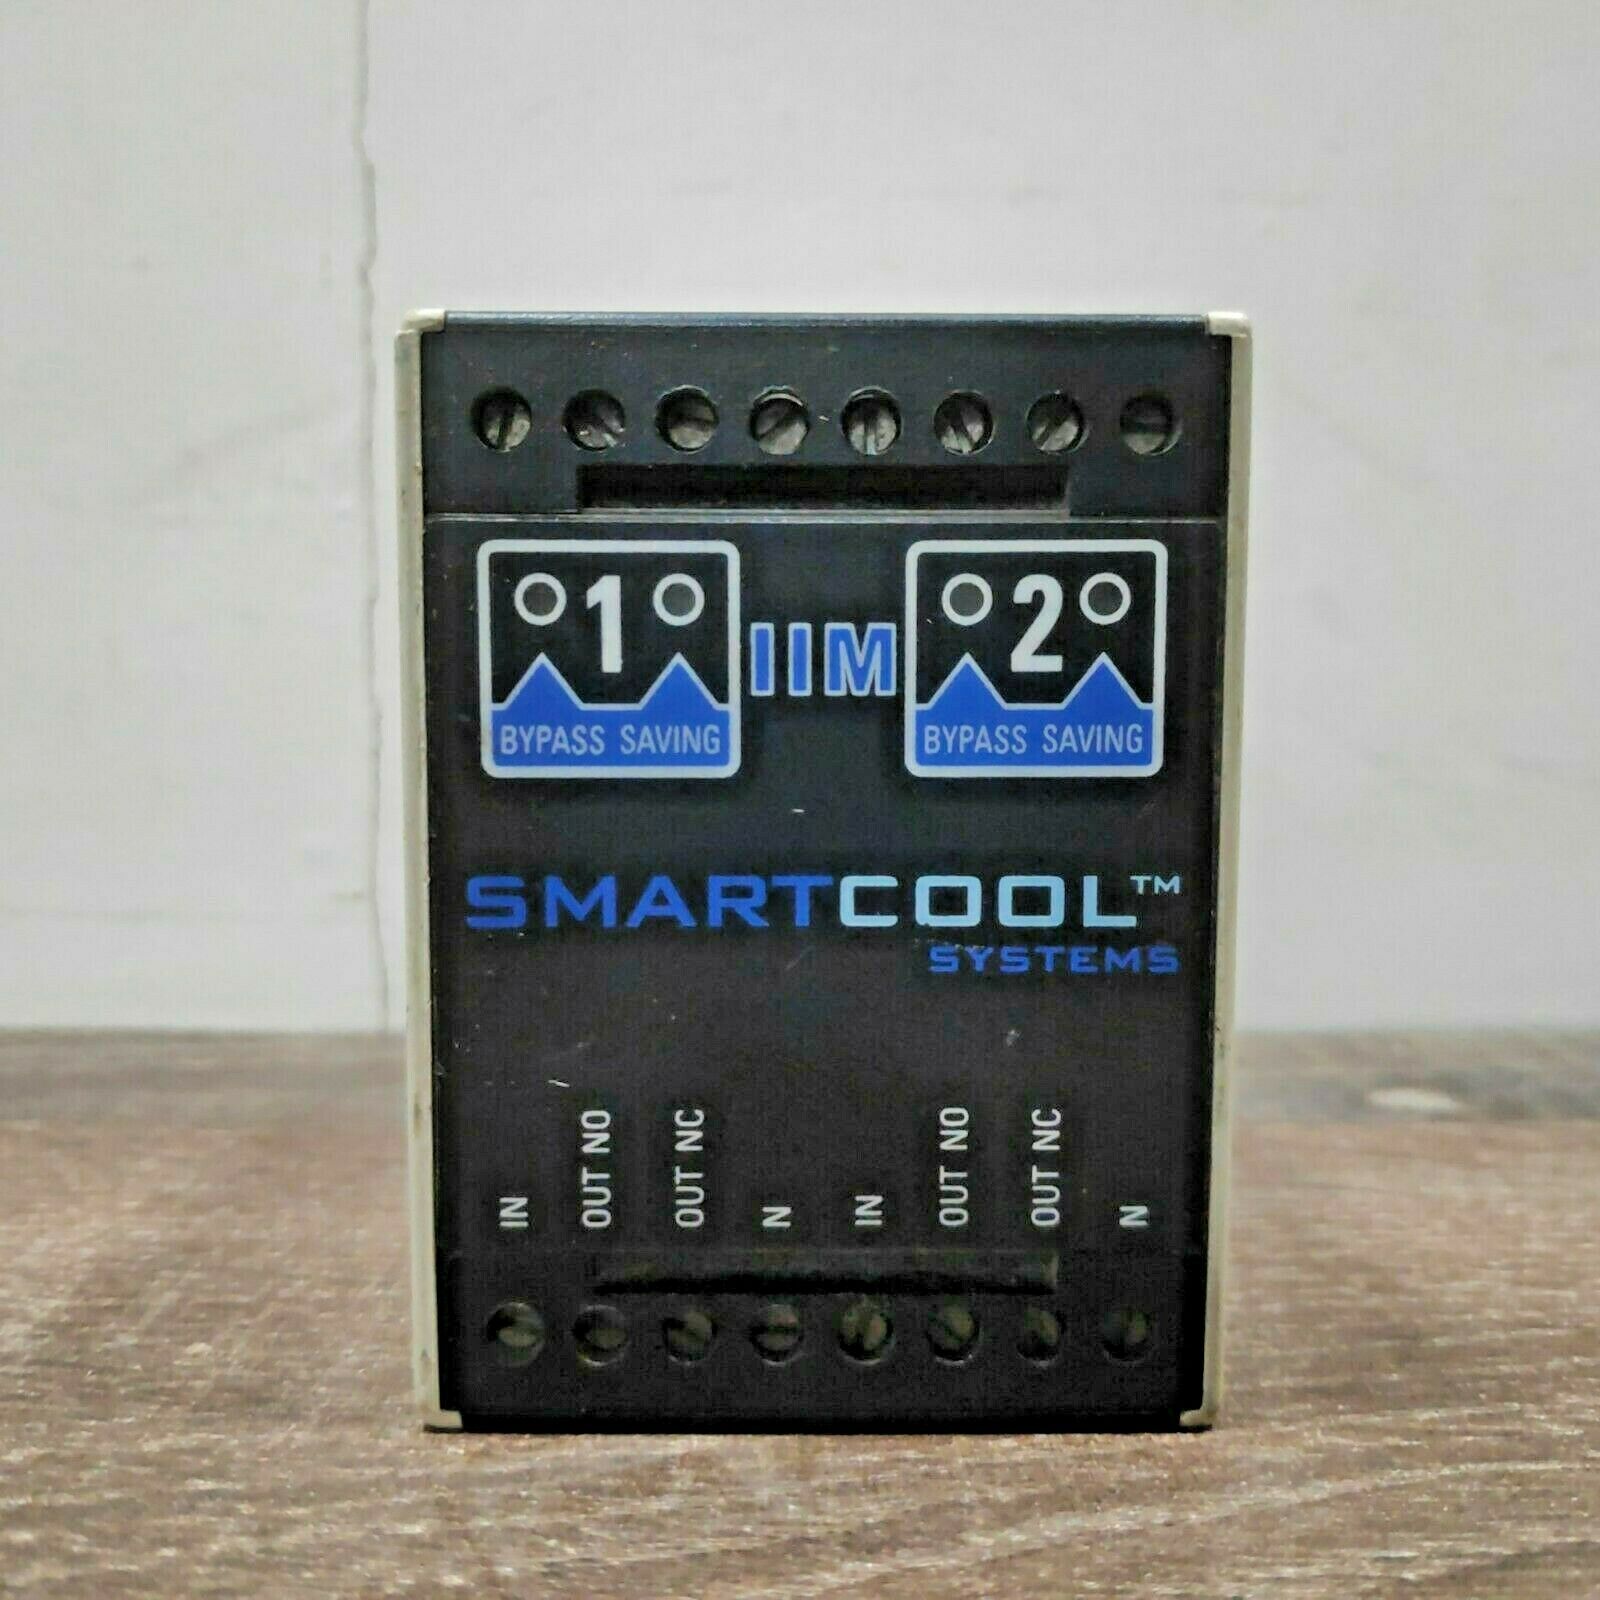 SMARTCOOL SYSTEMS SIM-06 ENERGY SAVING SYSTEM MODULE